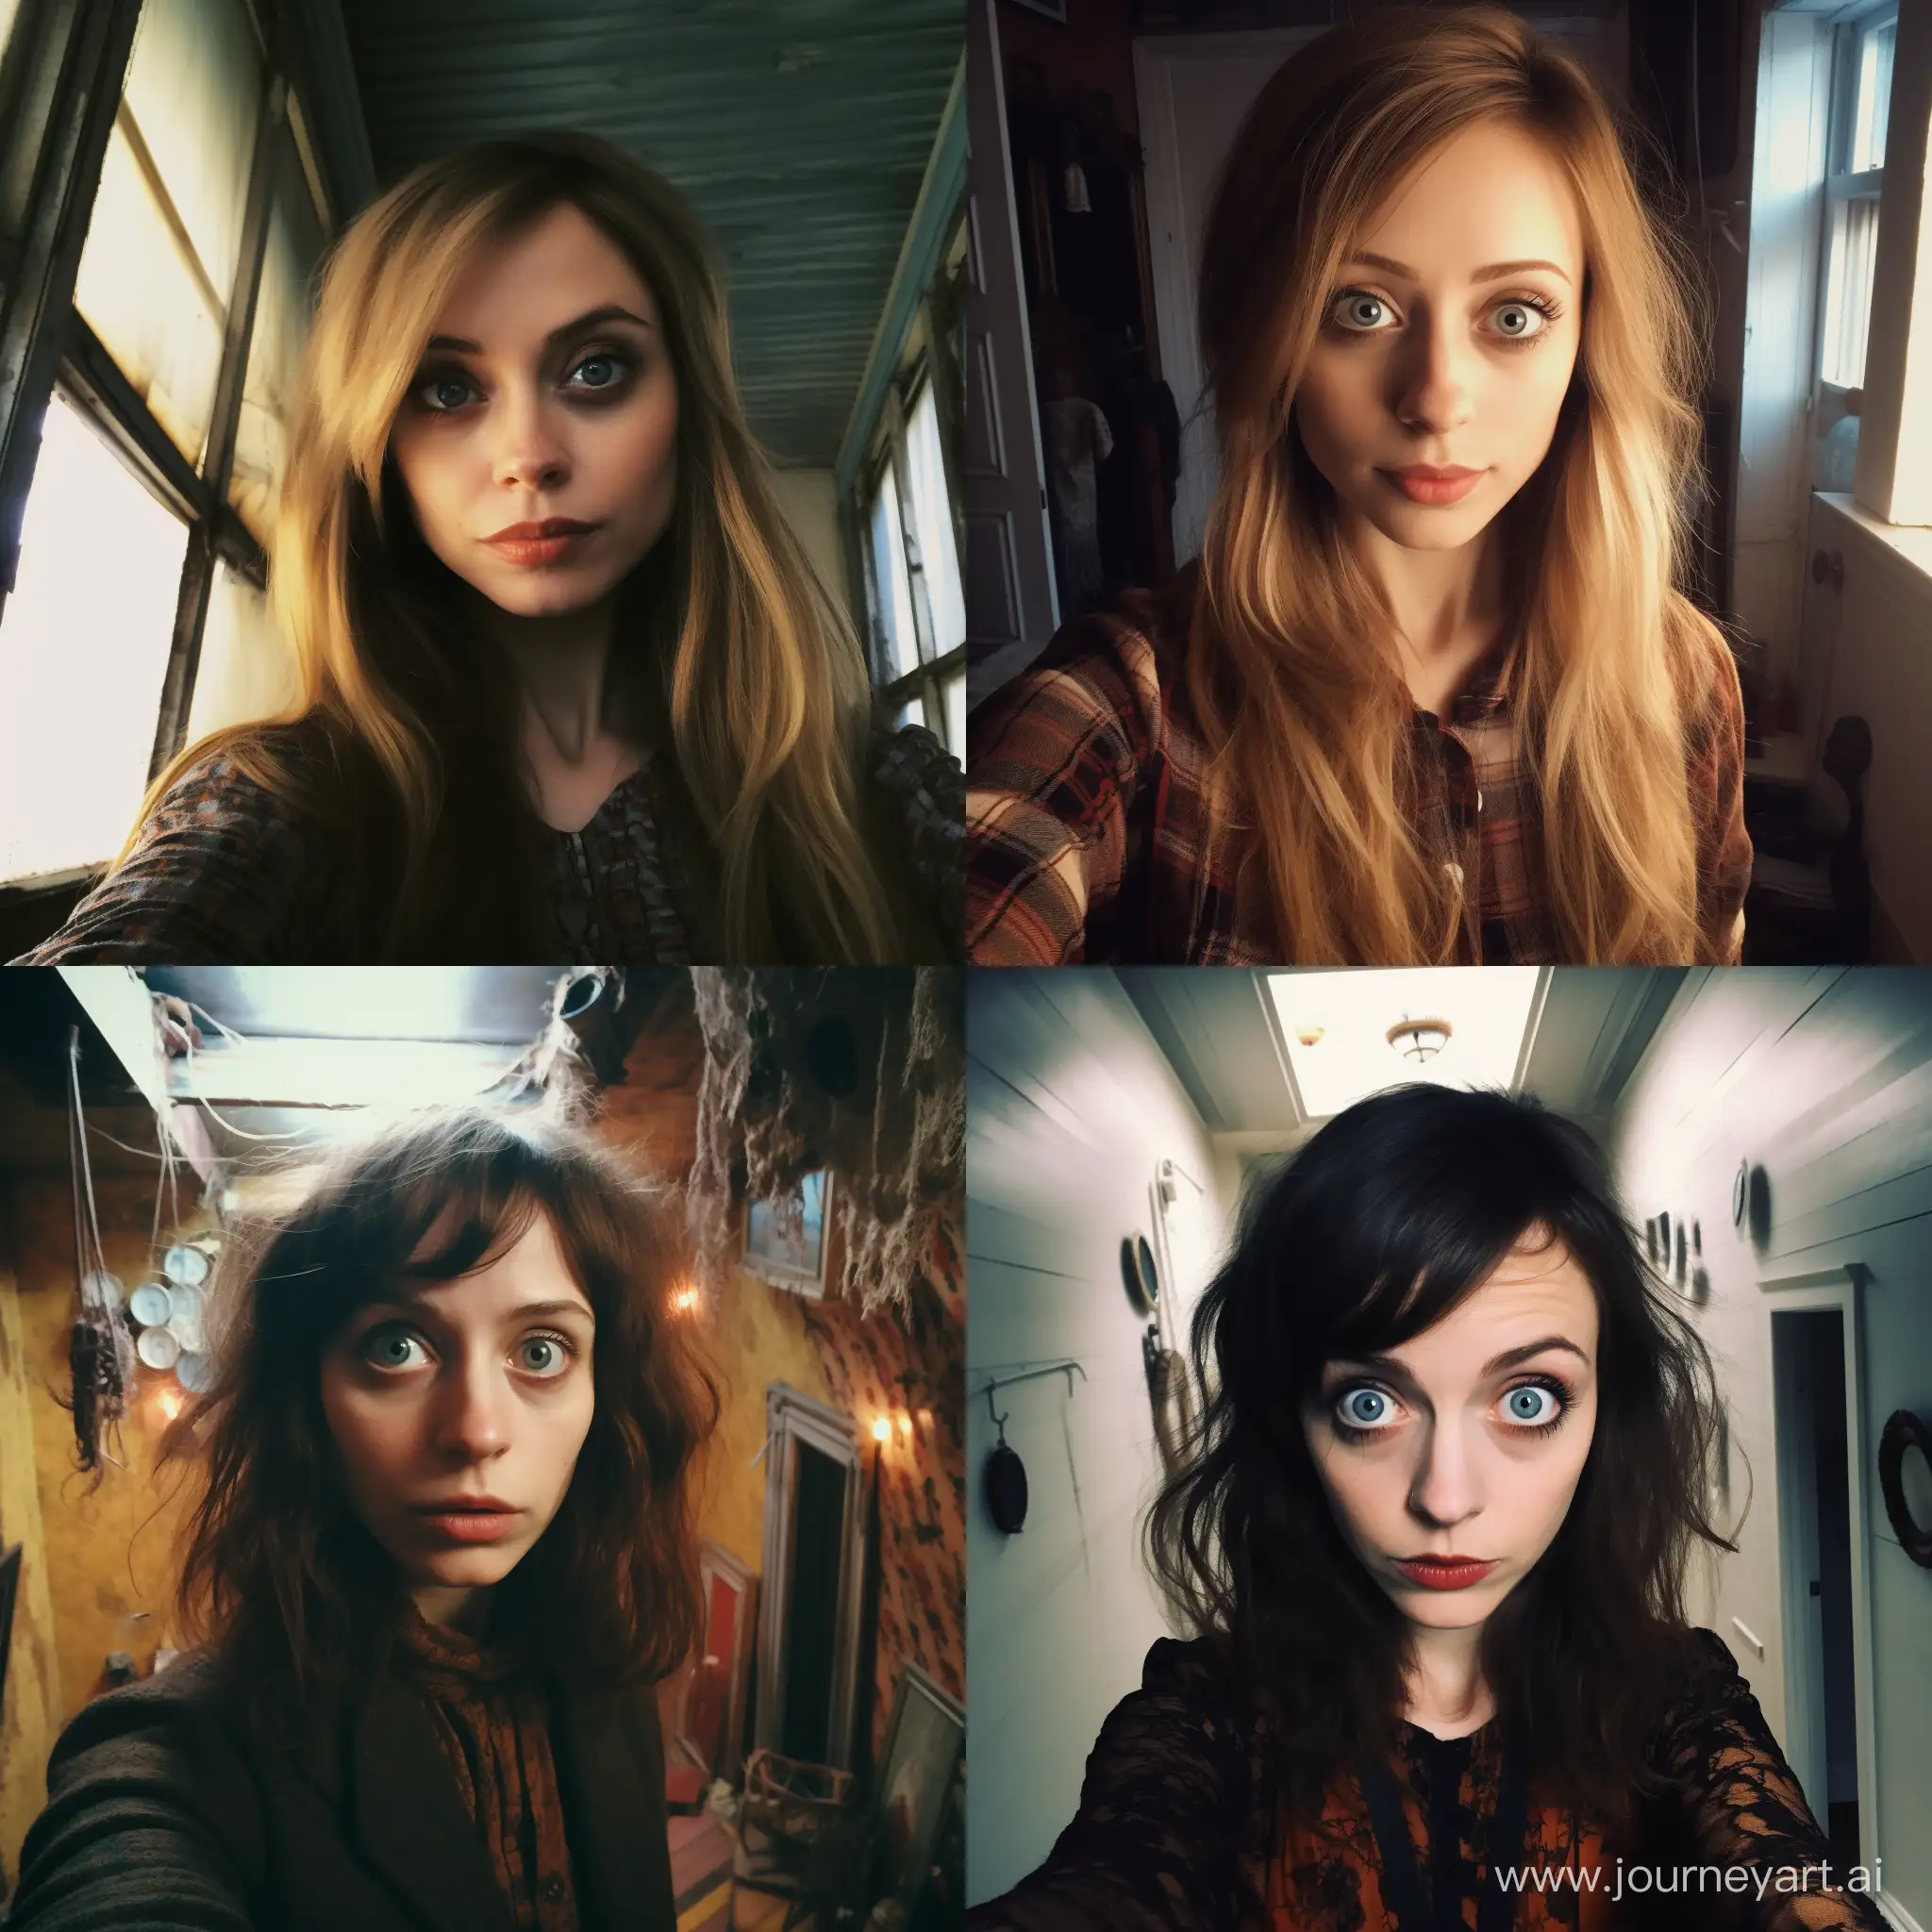 Captivating-Selfie-Woman-with-Big-Eyes-in-a-LowQuality-Phone-Shot